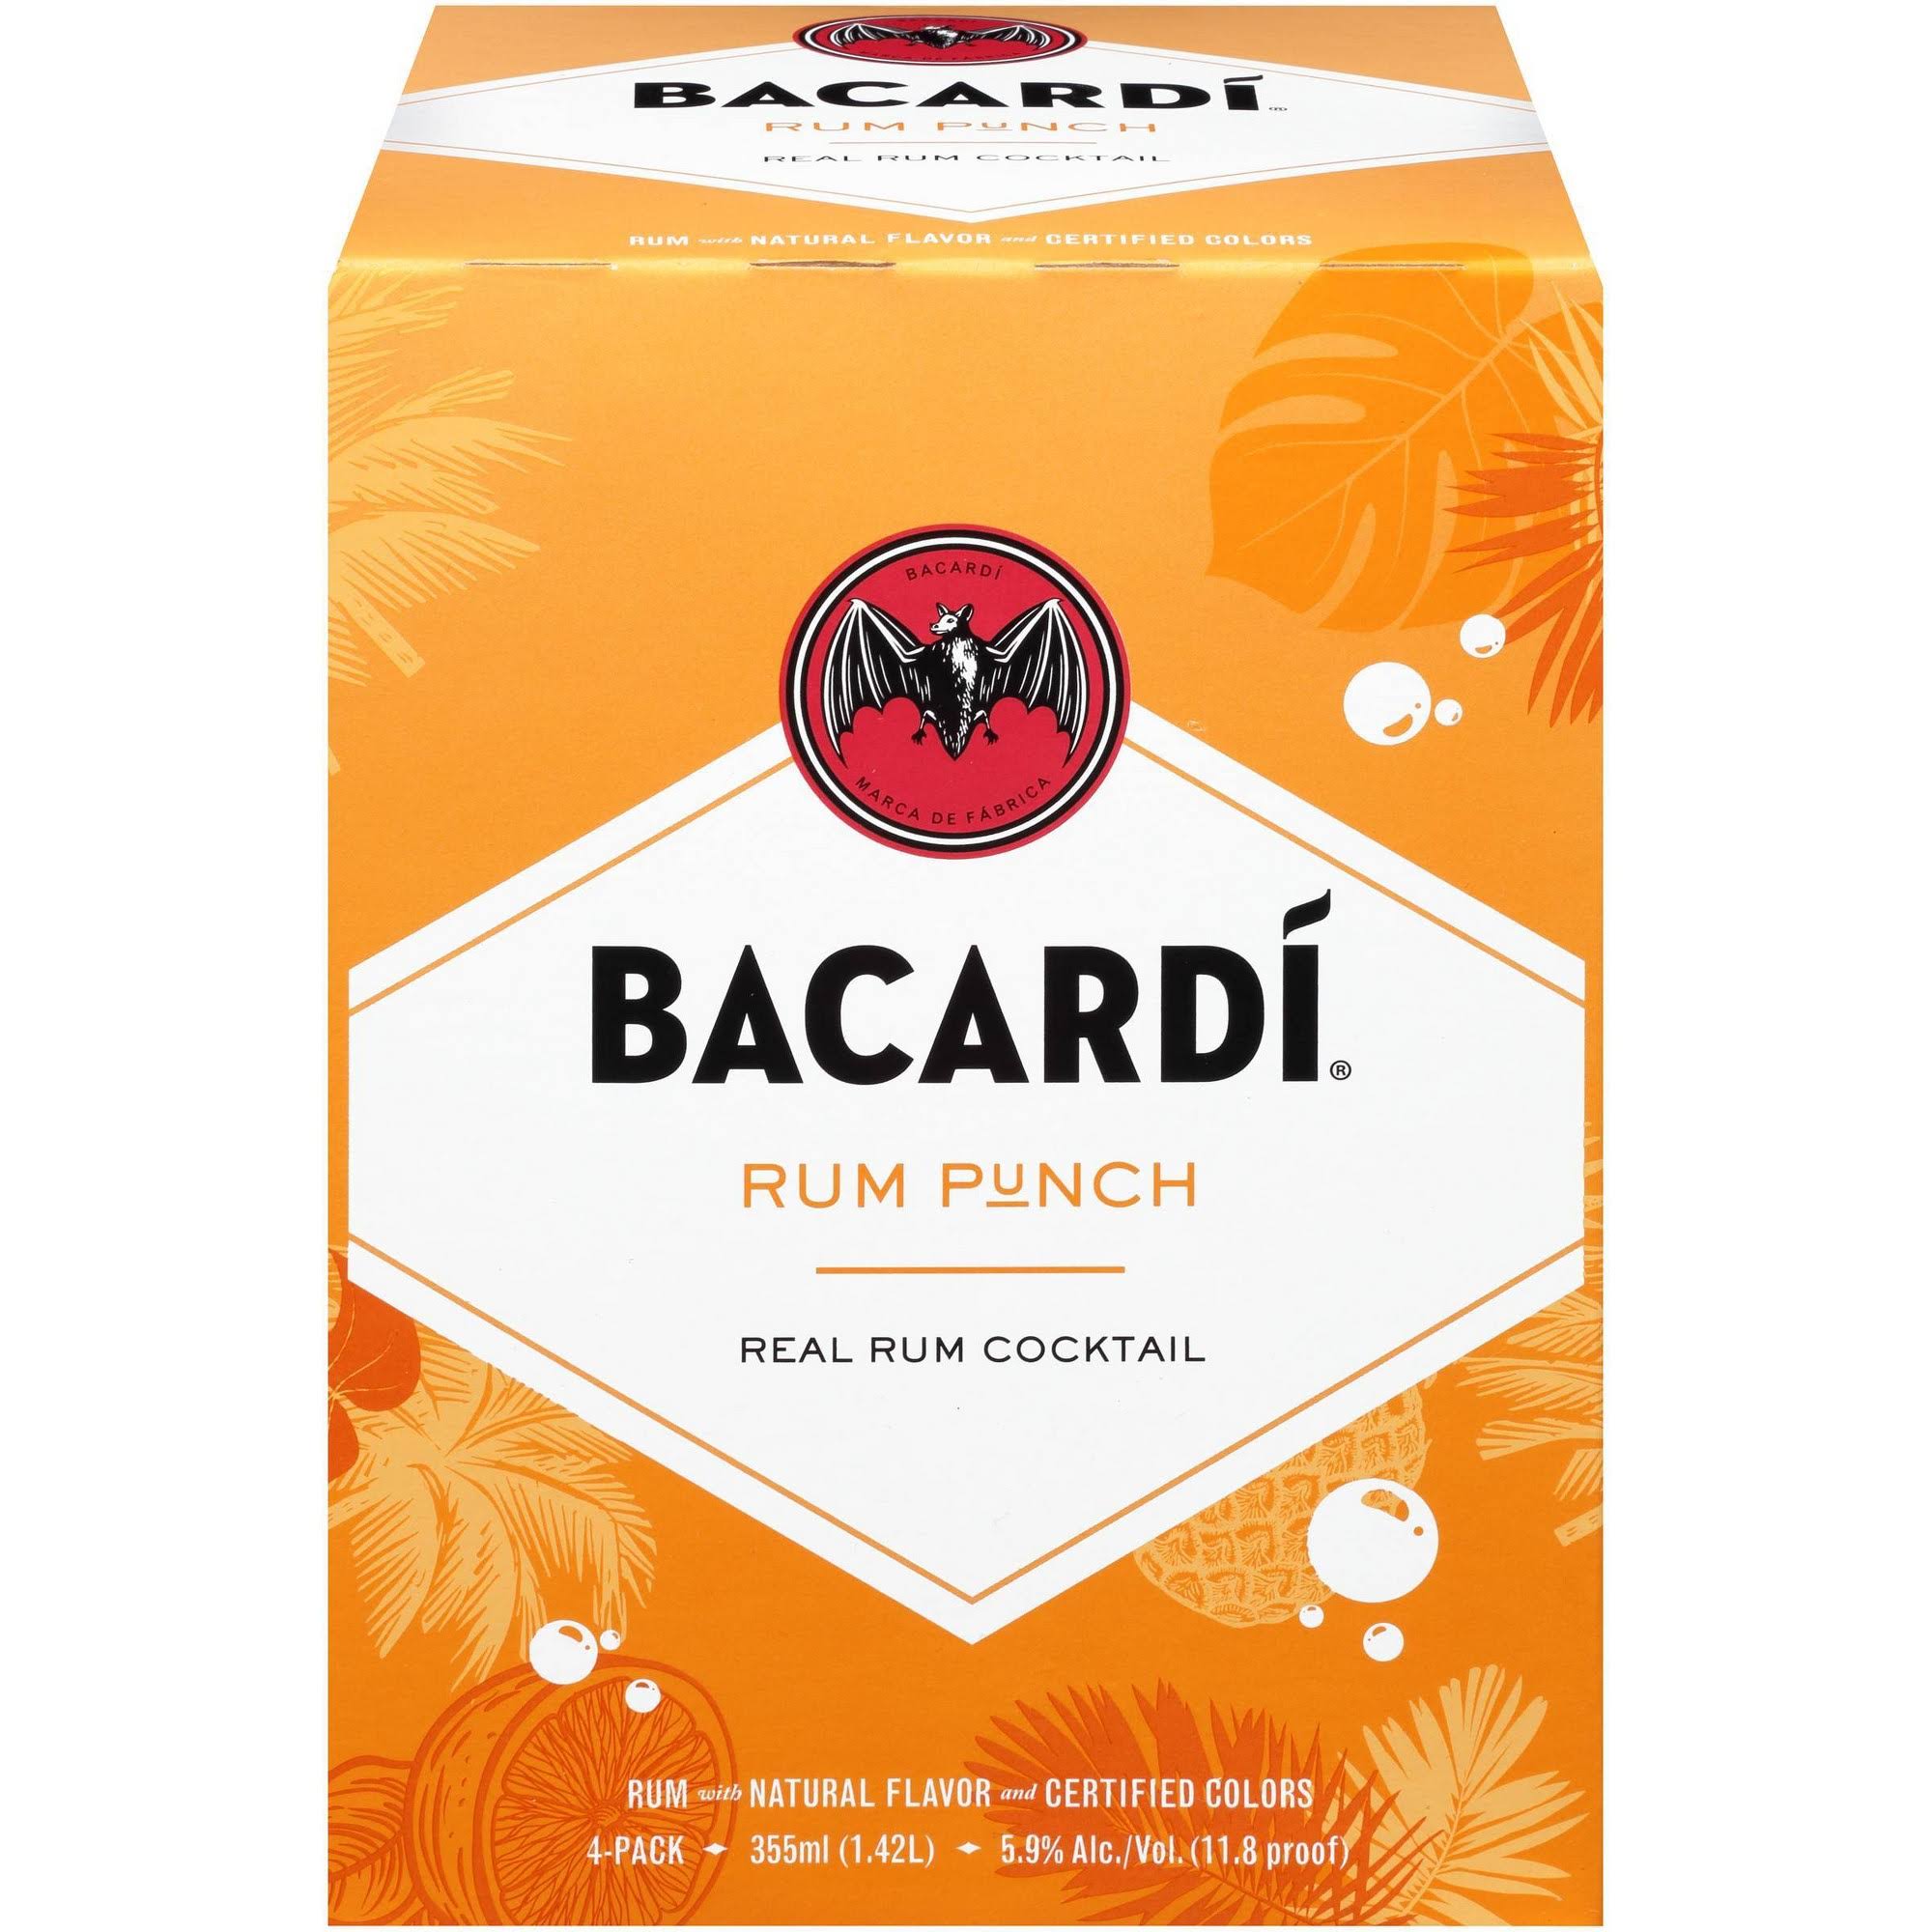 Bacardi Cocktail, Rum Punch, 4 Pack - 4 pack, 355 ml cans